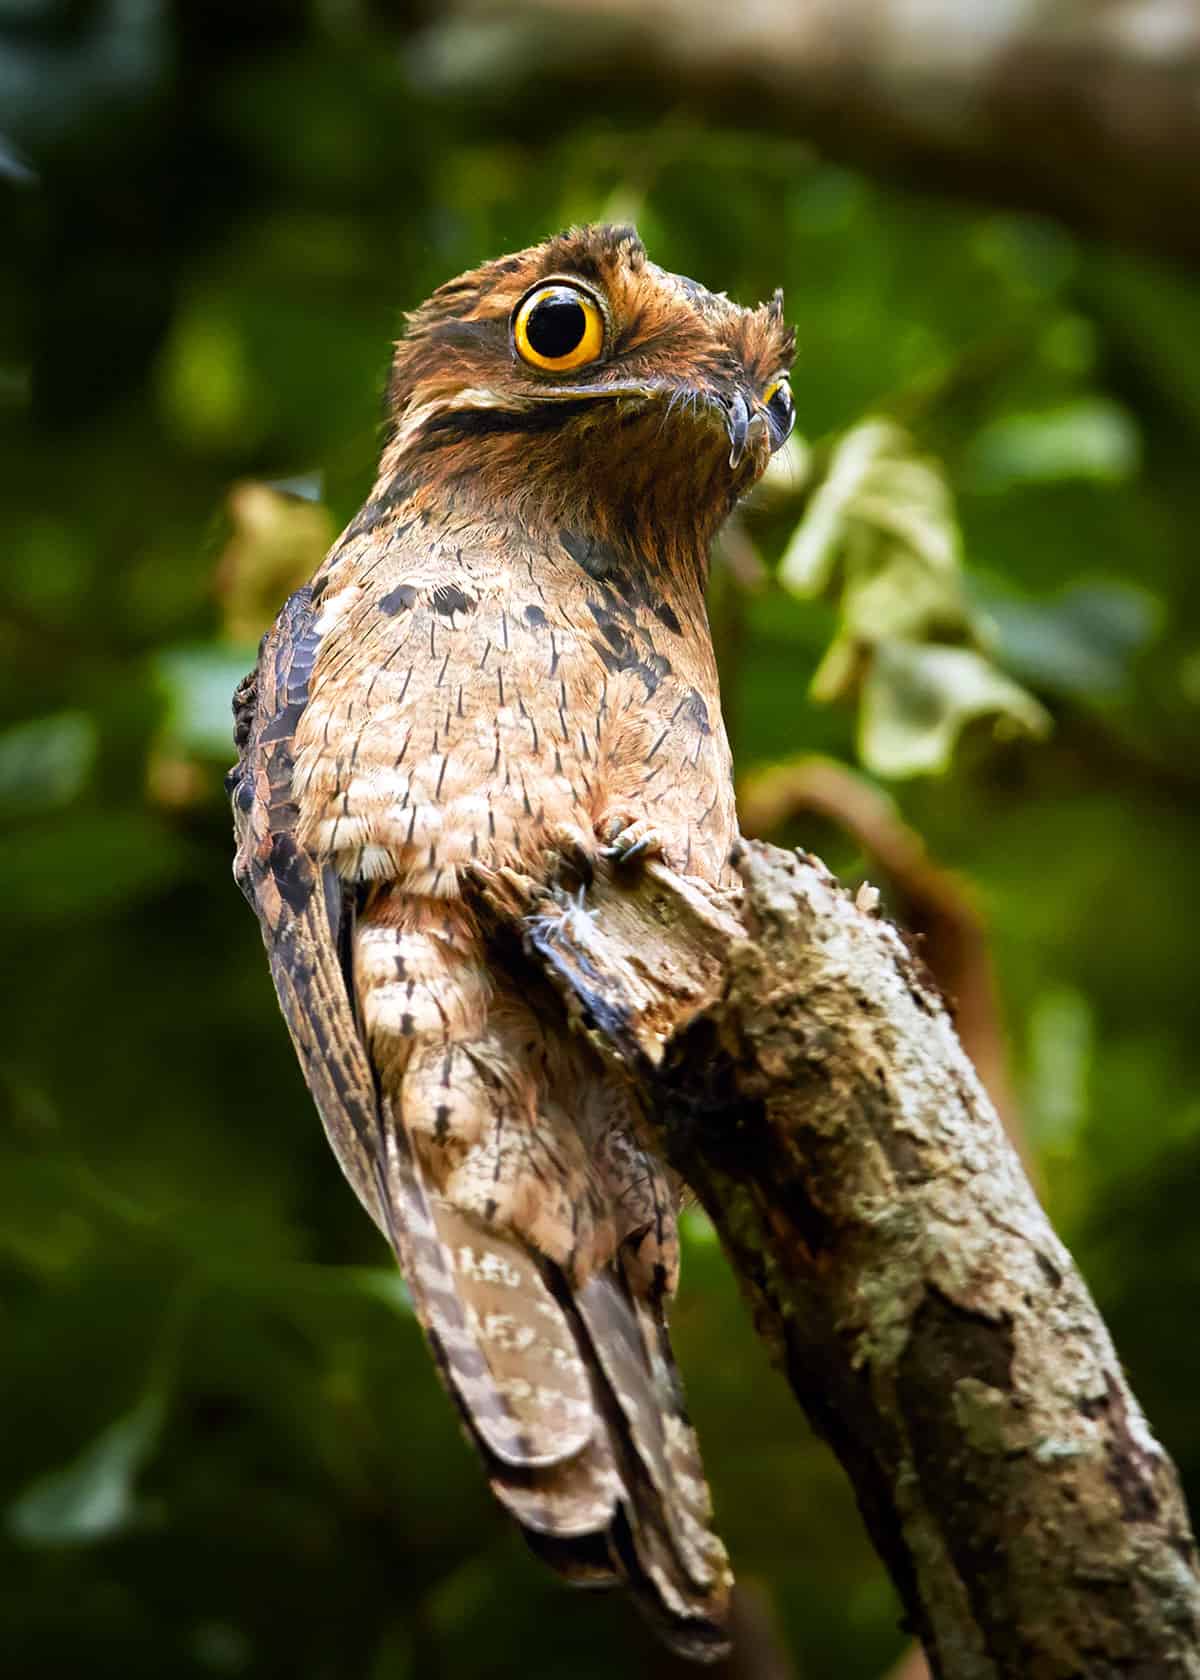 Facts about potoo